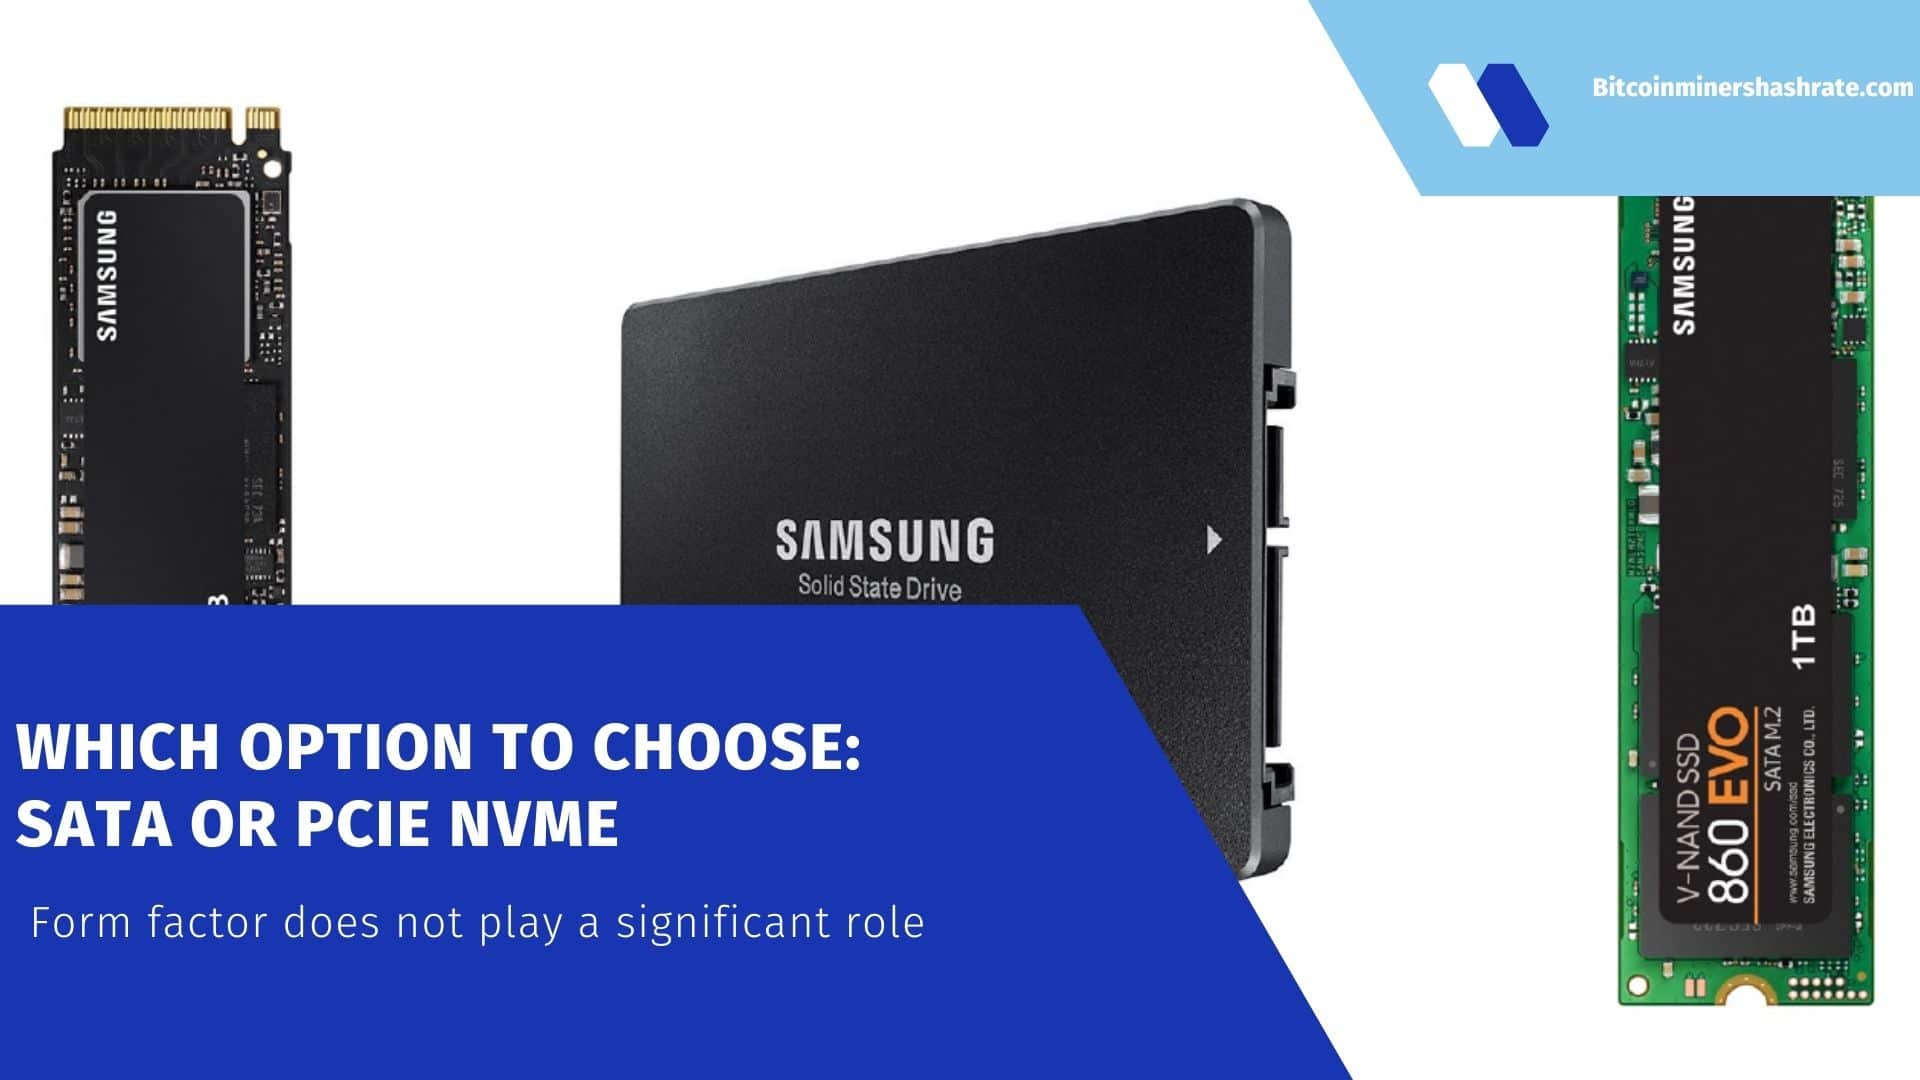 NVMe vs SATA: What is the difference